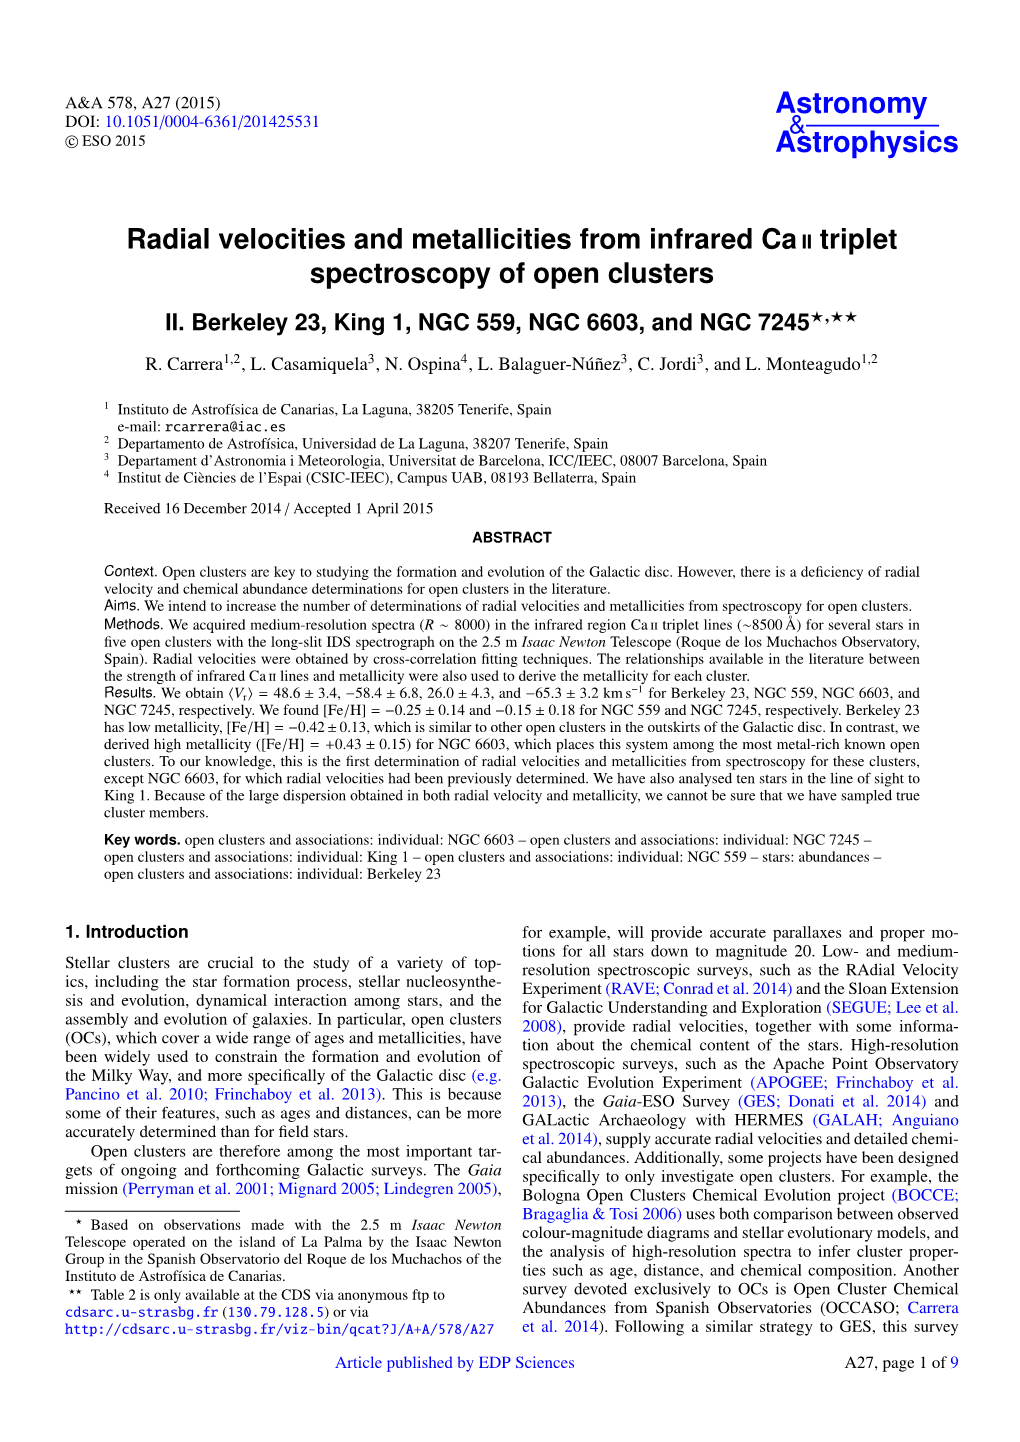 Radial Velocities and Metallicities from Infrared Ca Ii Triplet Spectroscopy of Open Clusters II